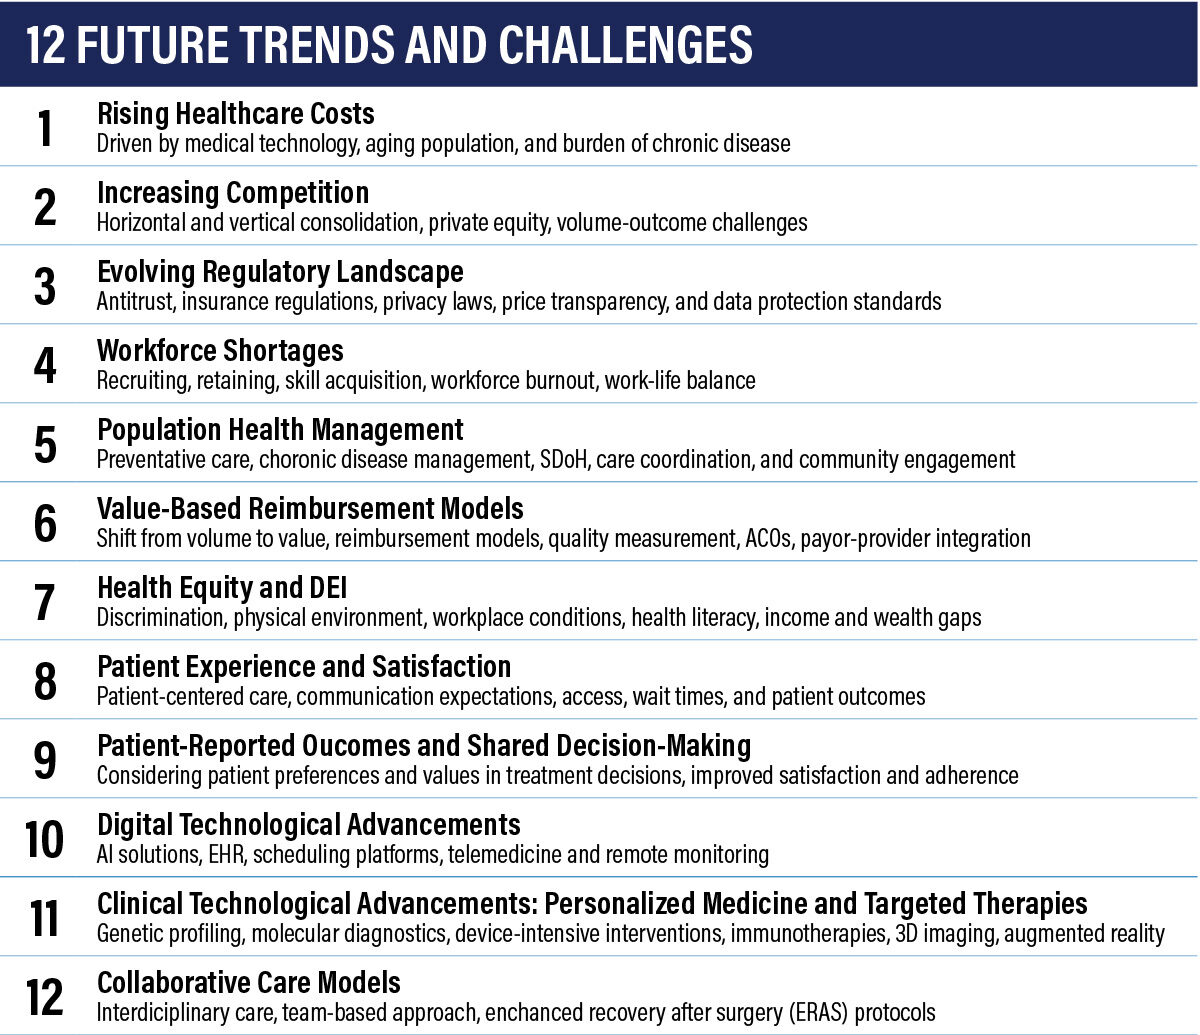 12 Future Trends and Challenges